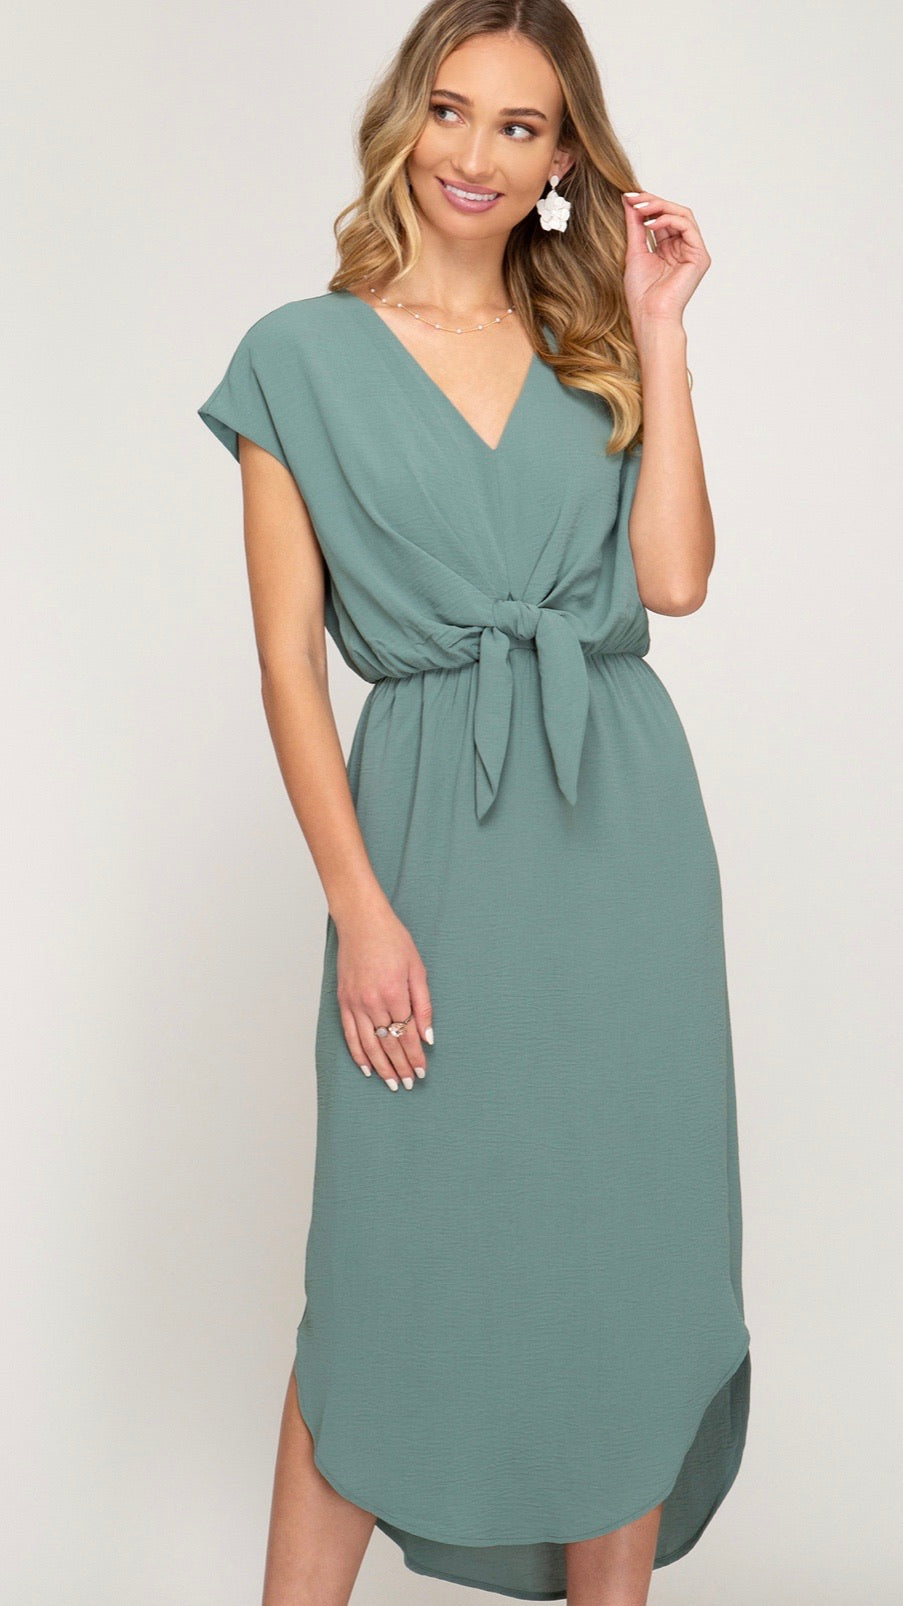 Lori V Neck Woven Dress - Corinne an Affordable Women's Clothing Boutique in the US USA